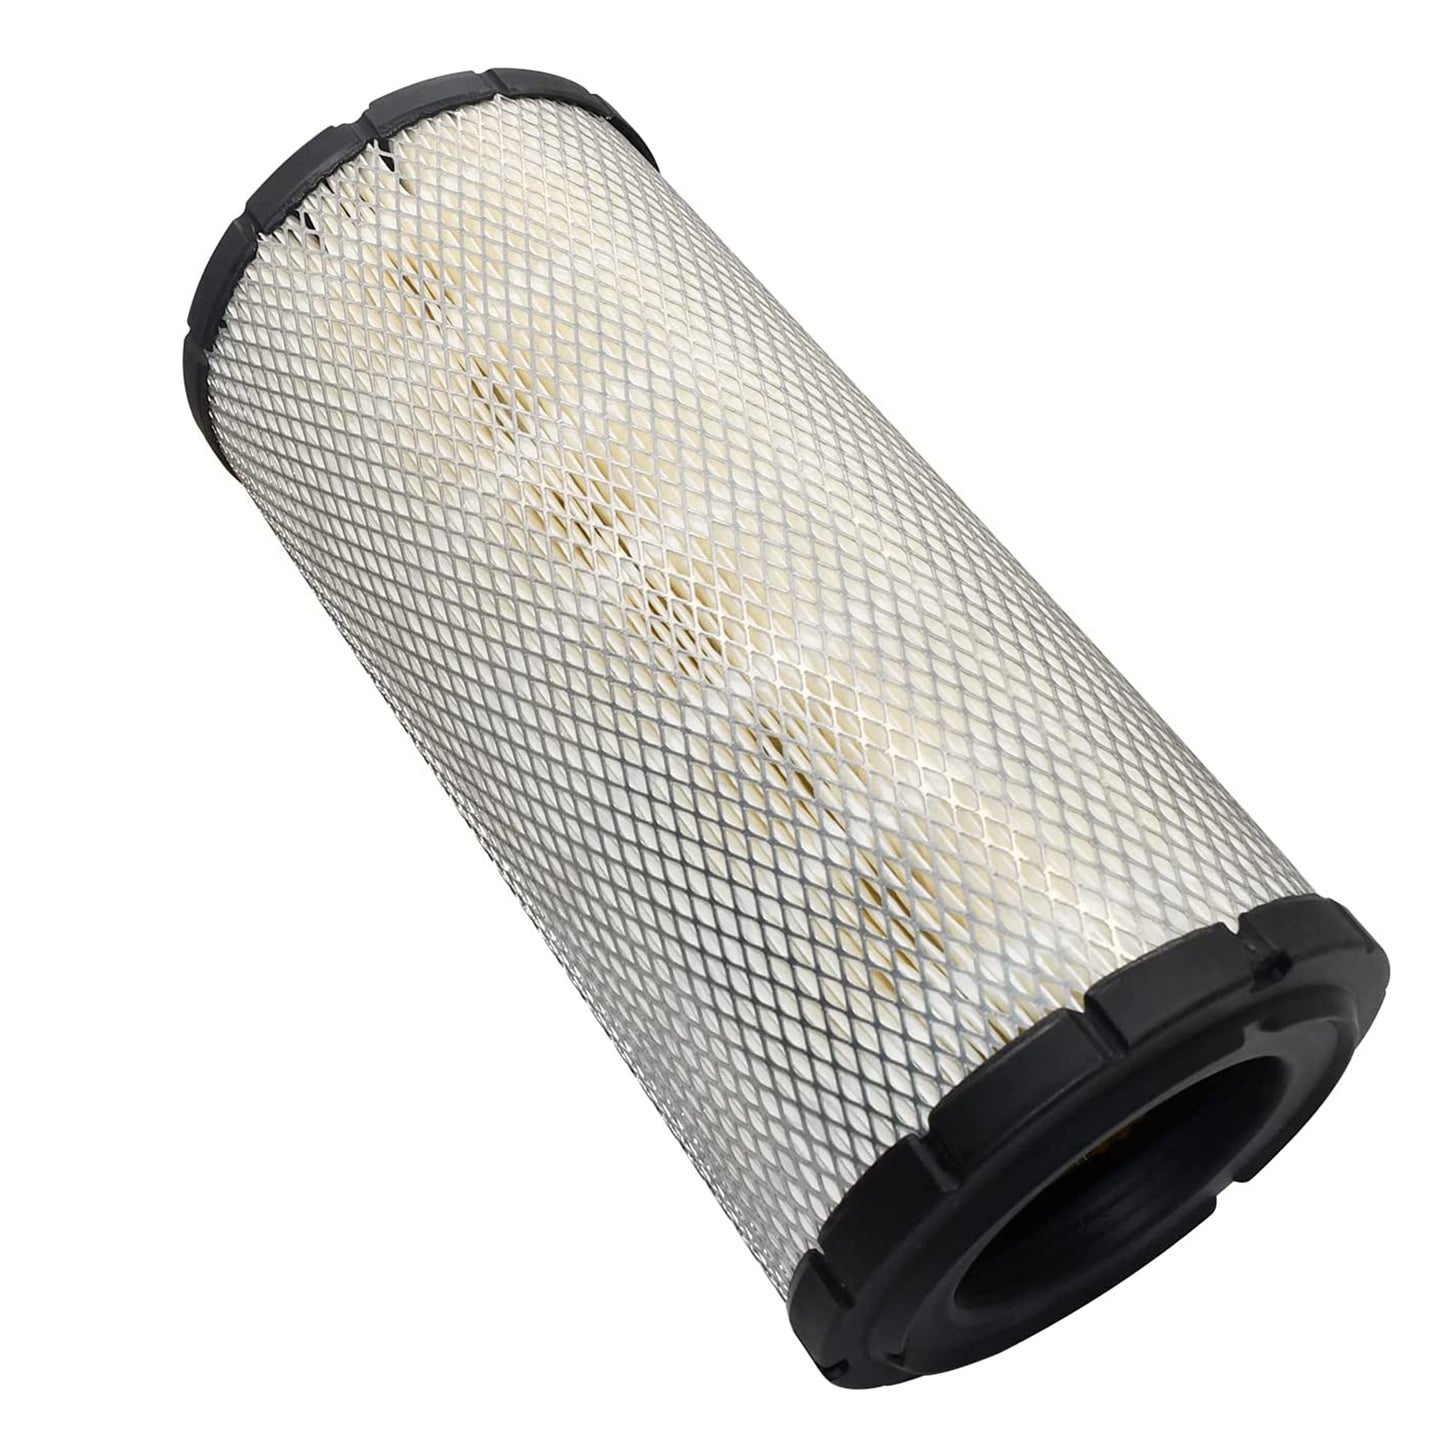 2X  5970026112 Air Filters Compatible with Kubota Tractor M Series M100GXDTC M100XDTC